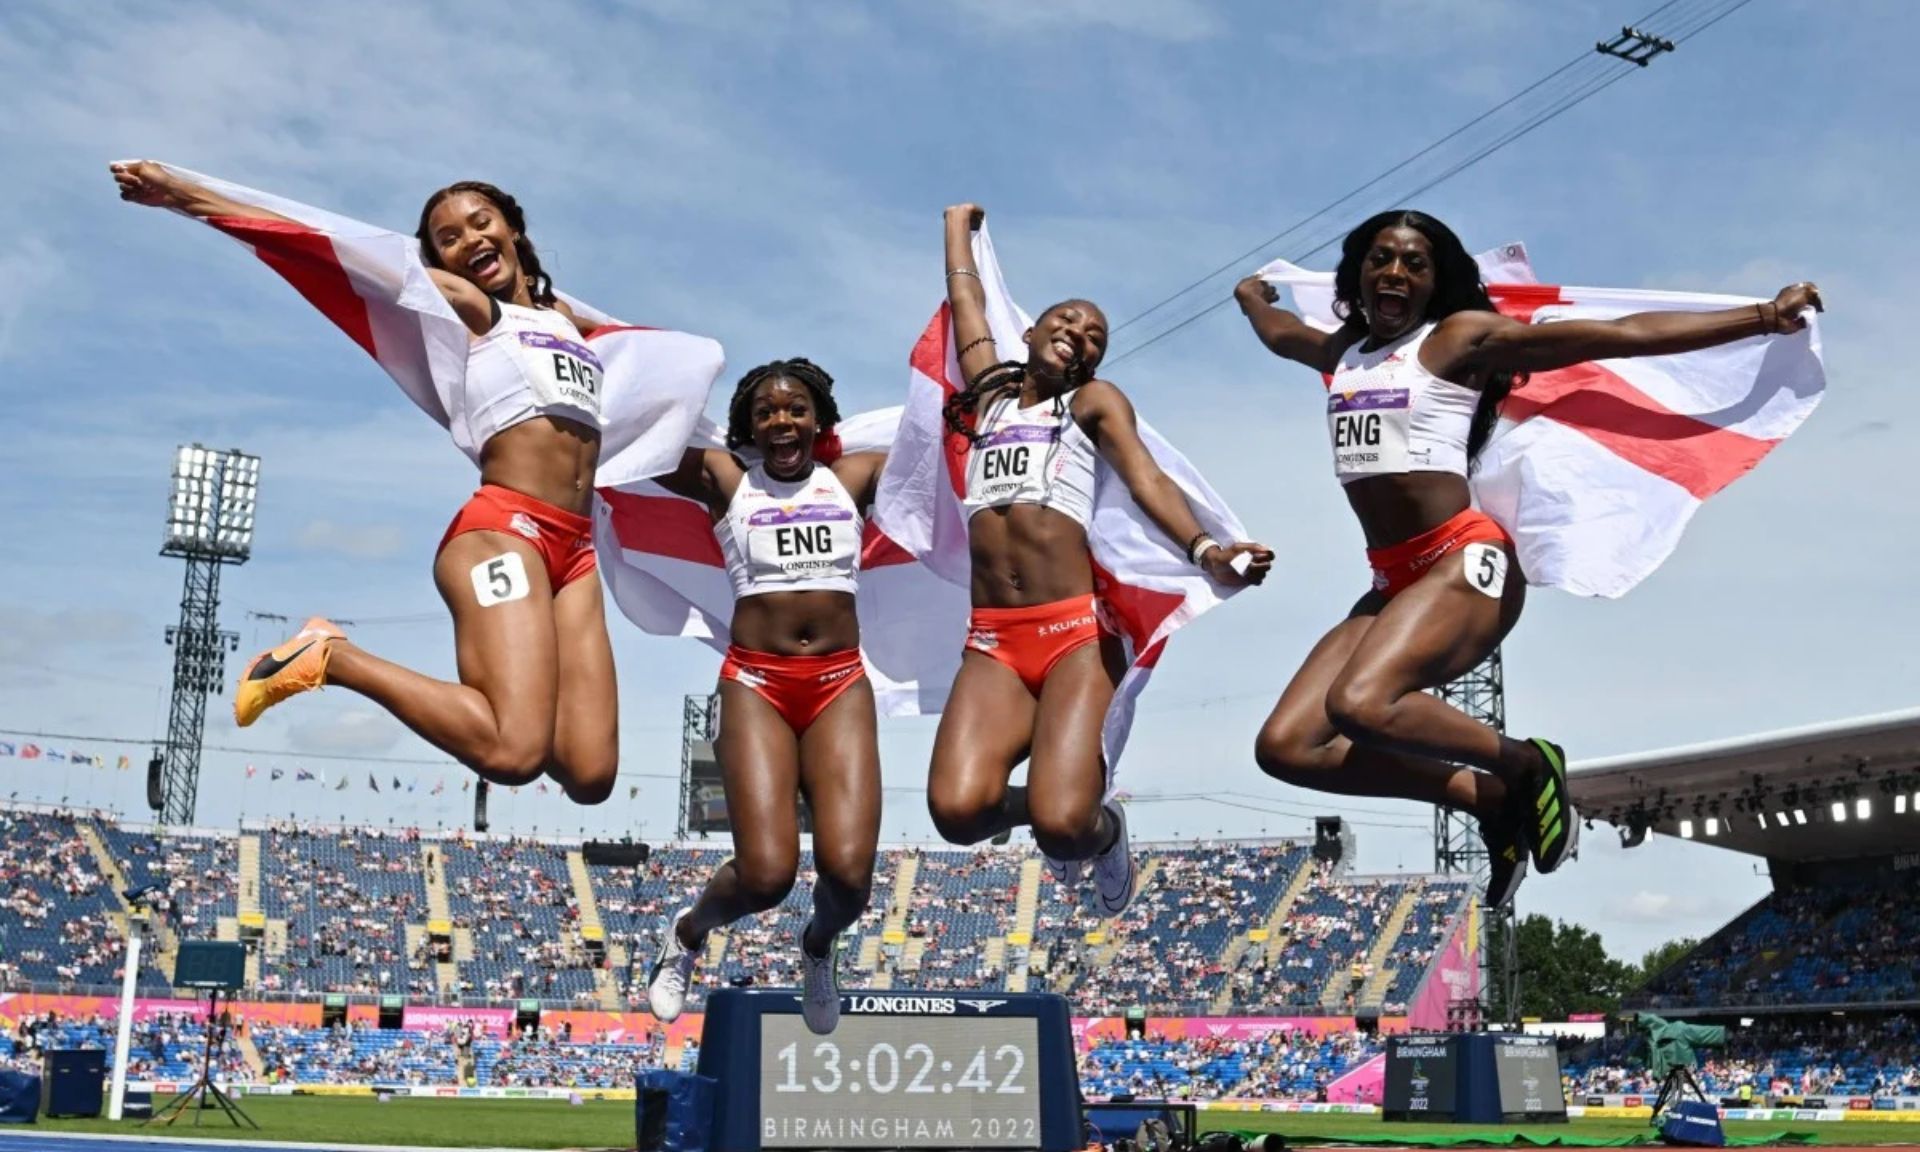 Silver medallists Asha Philip, Imani Lansiquot, Bianca Williams and Daryll Neita celebrate after the women’s 4x100m relay final at the 2022 Commonwealth Games in Birmingham.